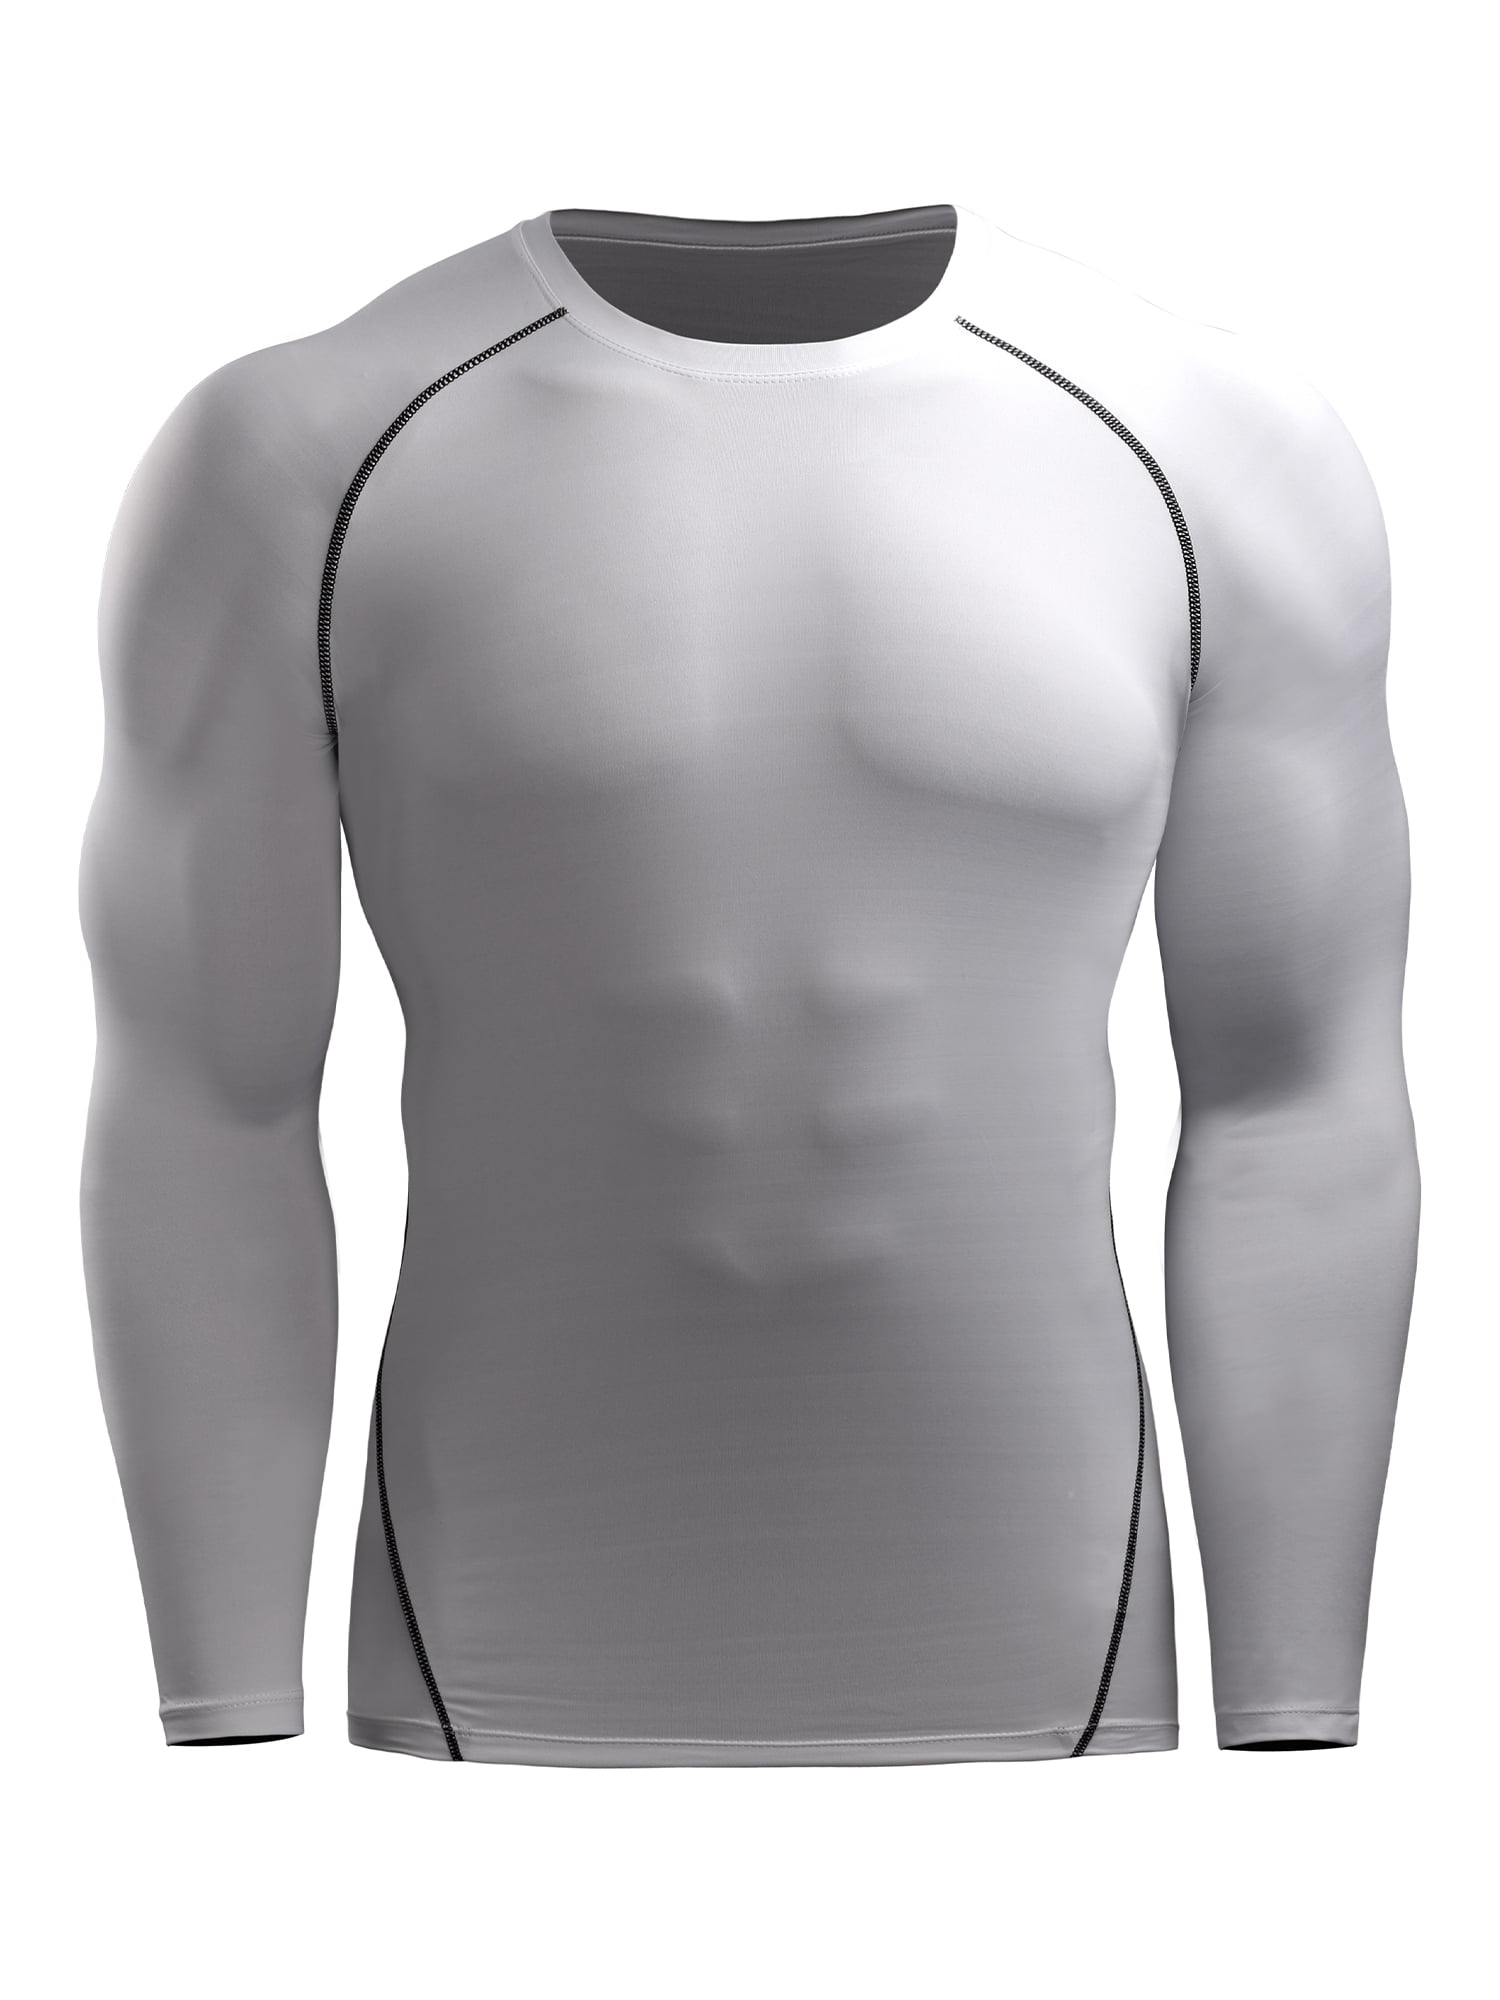 Defender Mens Cool Dry Compression Baselayer Quick Dry Running Shirt 